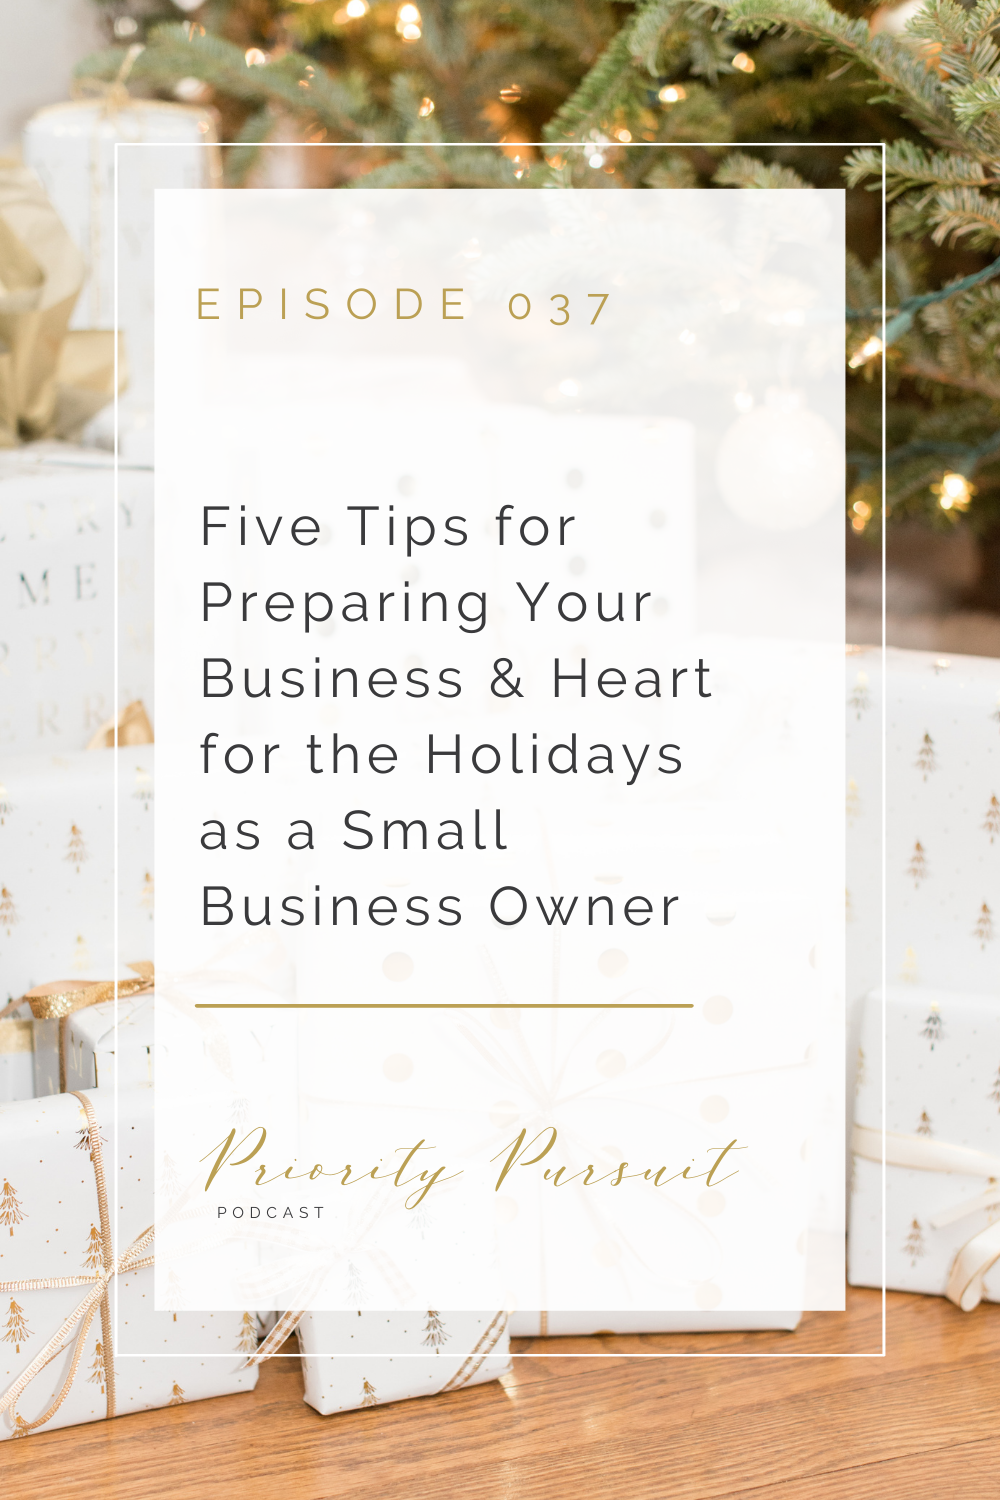 In this episode of “Priority Pursuit,” Victoria Rayburn five tips for preparing your business and heart for the holidays as a small business owner. 